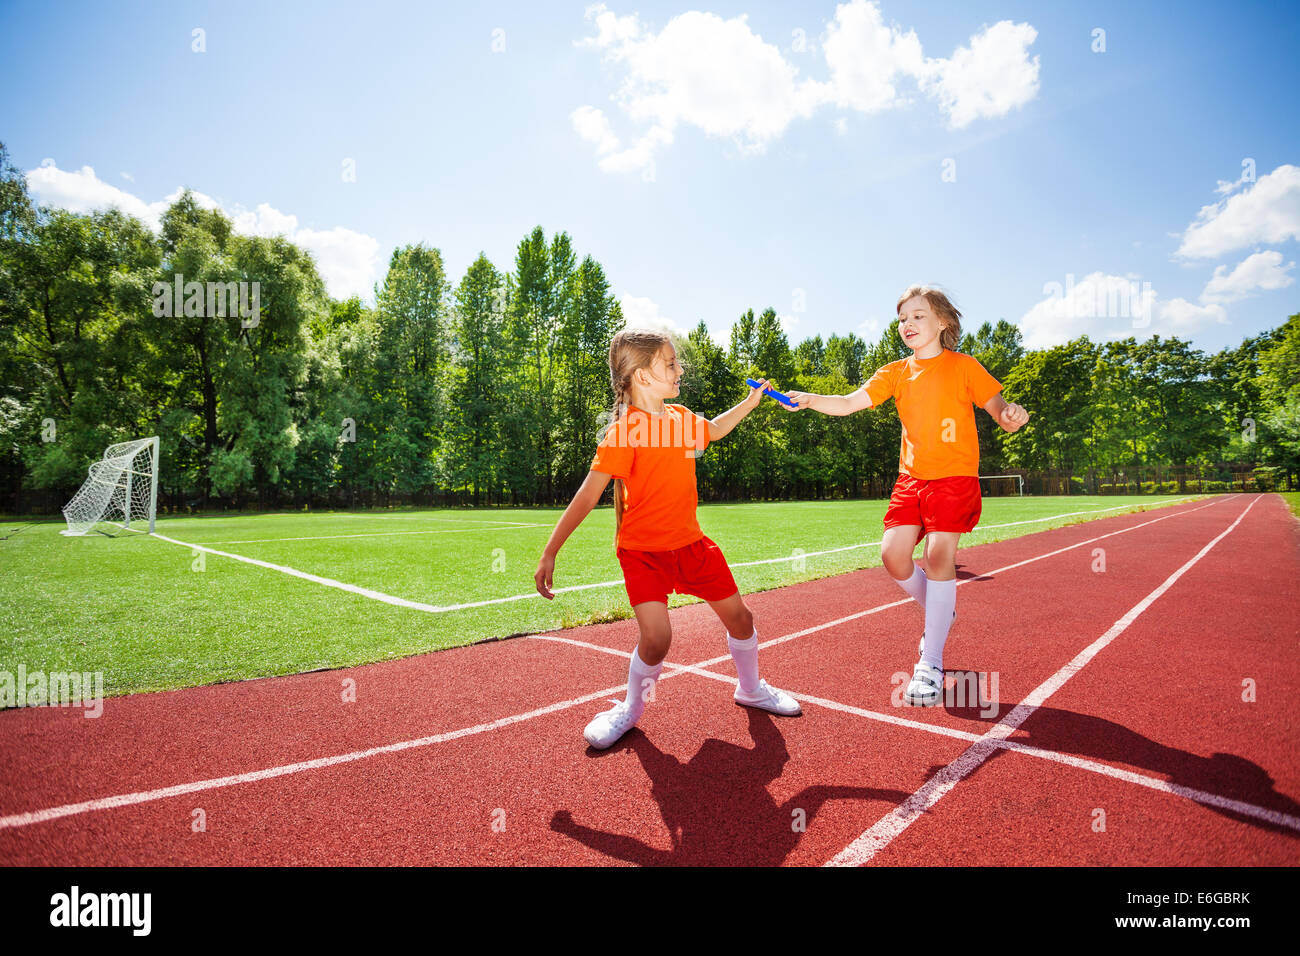 Running girl with baton hands it to other runner Stock Photo